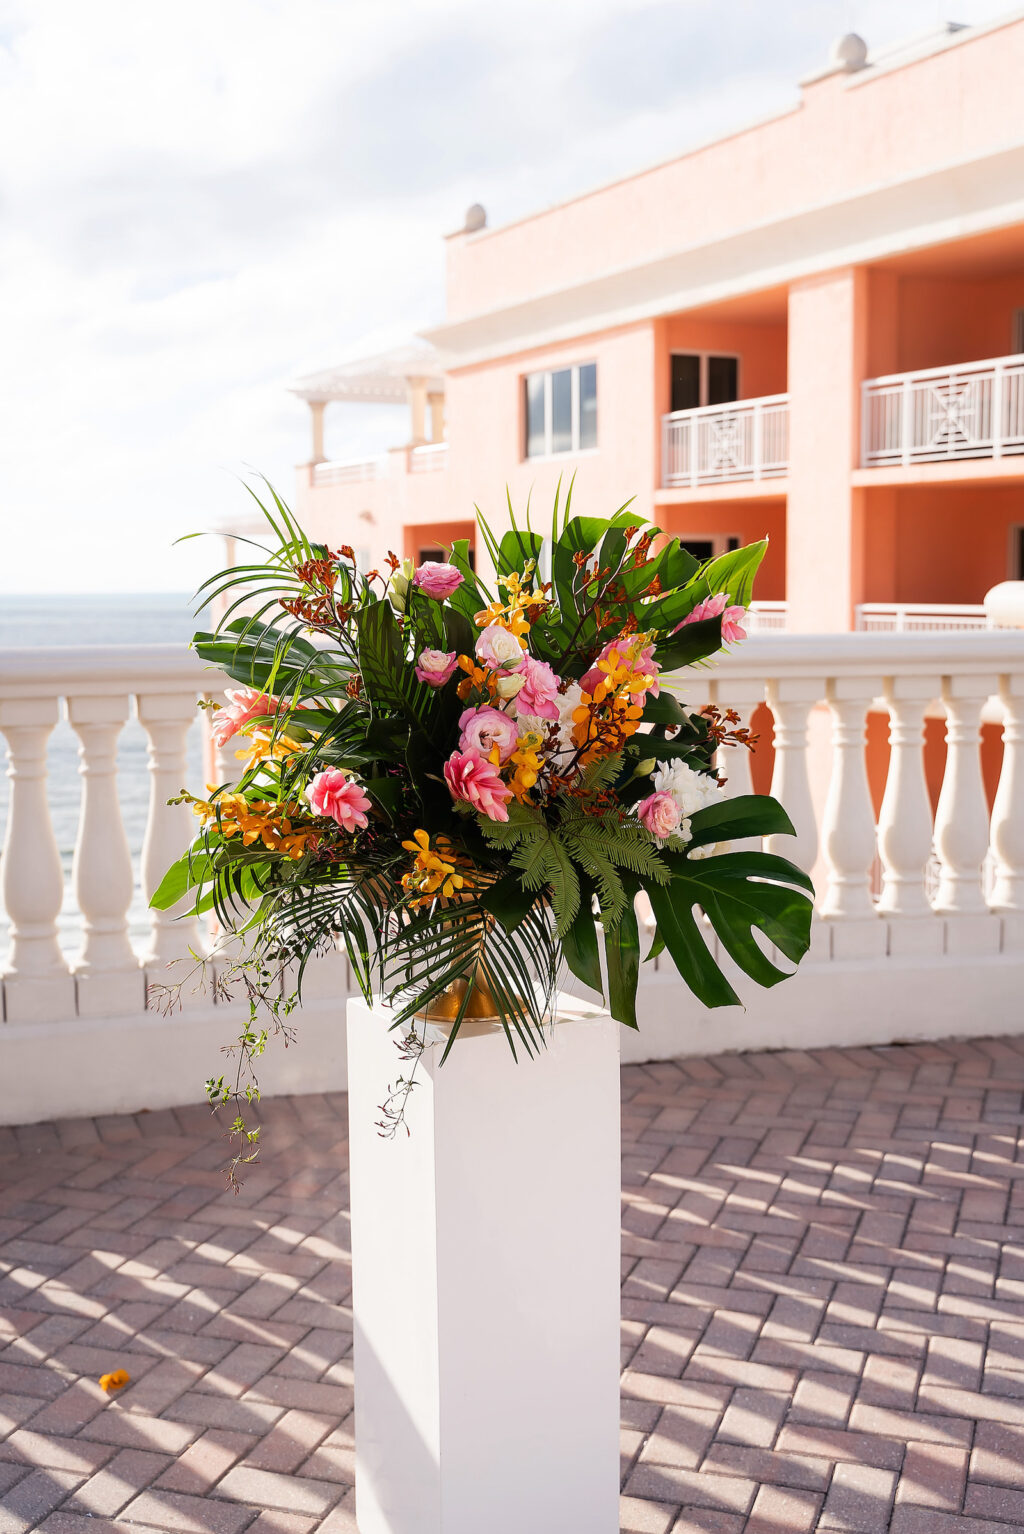 Tropical Rooftop Wedding Ceremony Decor, White Pedestal with Floral Arrangement, Monstera Palm Leaves, Pink Ginger, Yellow Flowers | Tampa Bay Wedding Photographer Limelight Photography | Clearwater Beach Wedding Venue Hyatt Regency Clearwater Beach